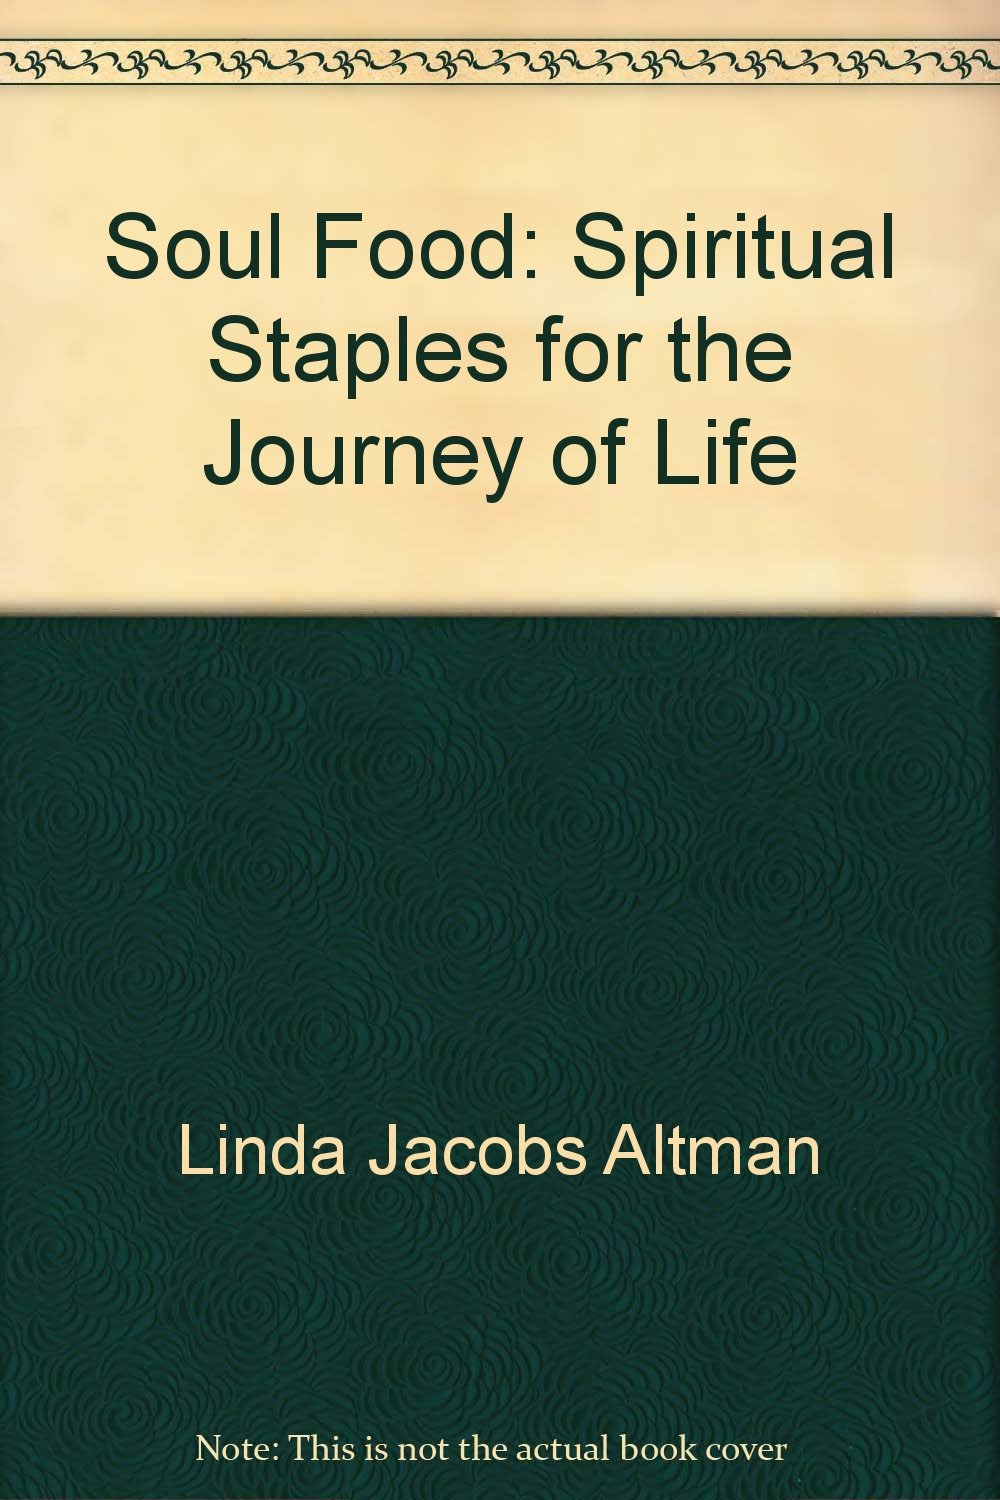 Soul Food: Spiritual Staples for the Journey of Life magazine reviews